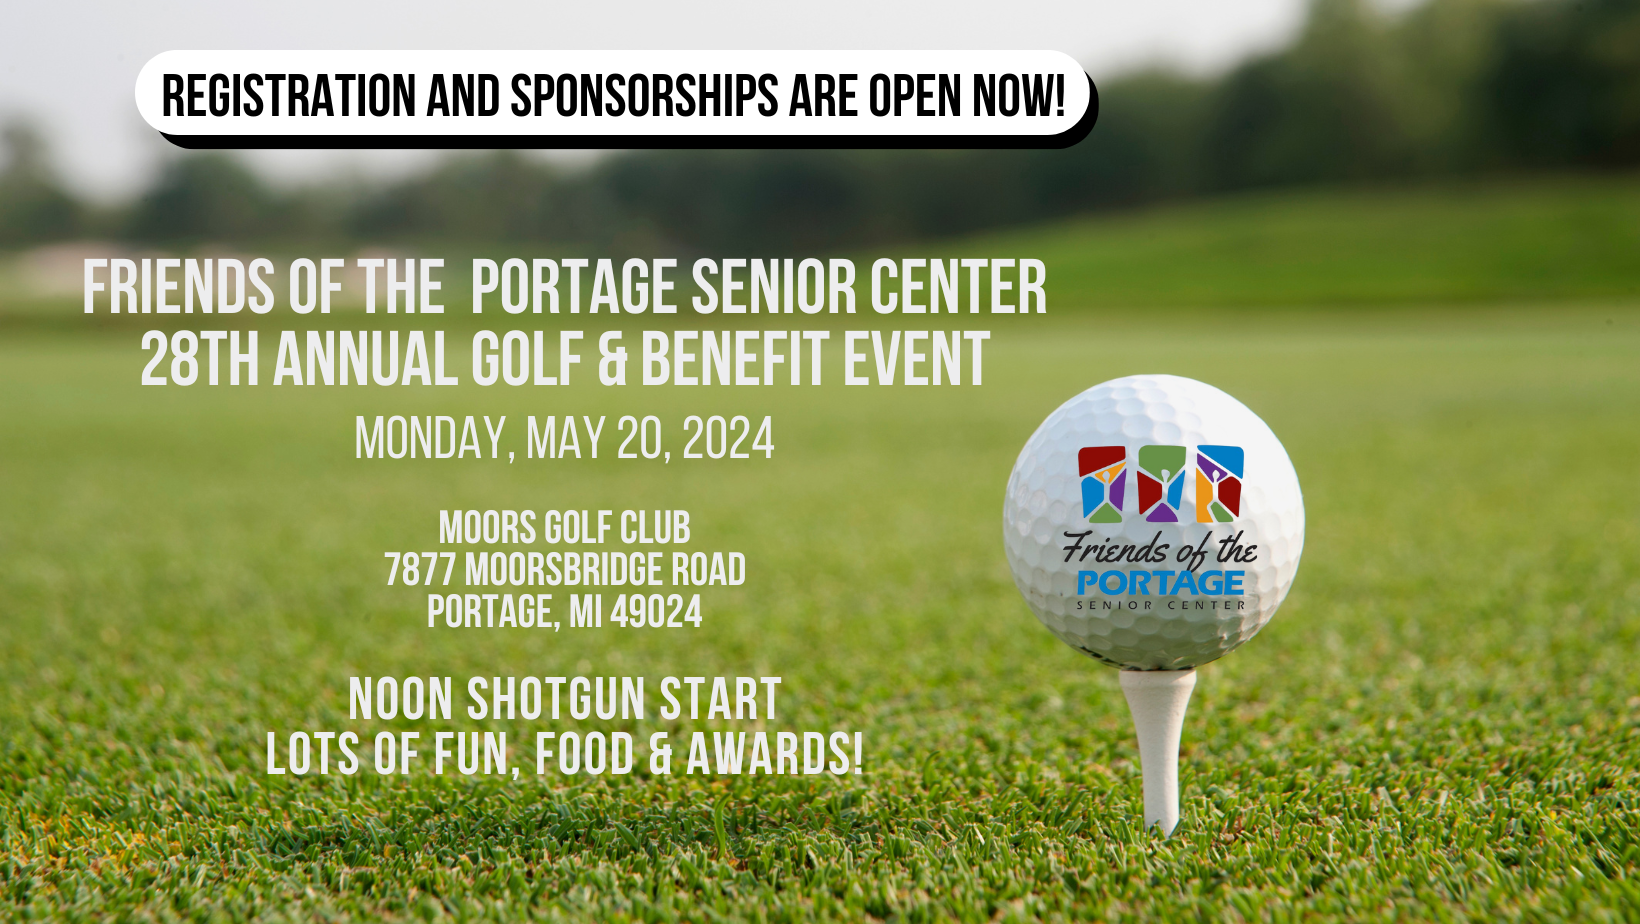 Friends of the Portage Senior Center 28th Annual Golf & Benefit Event